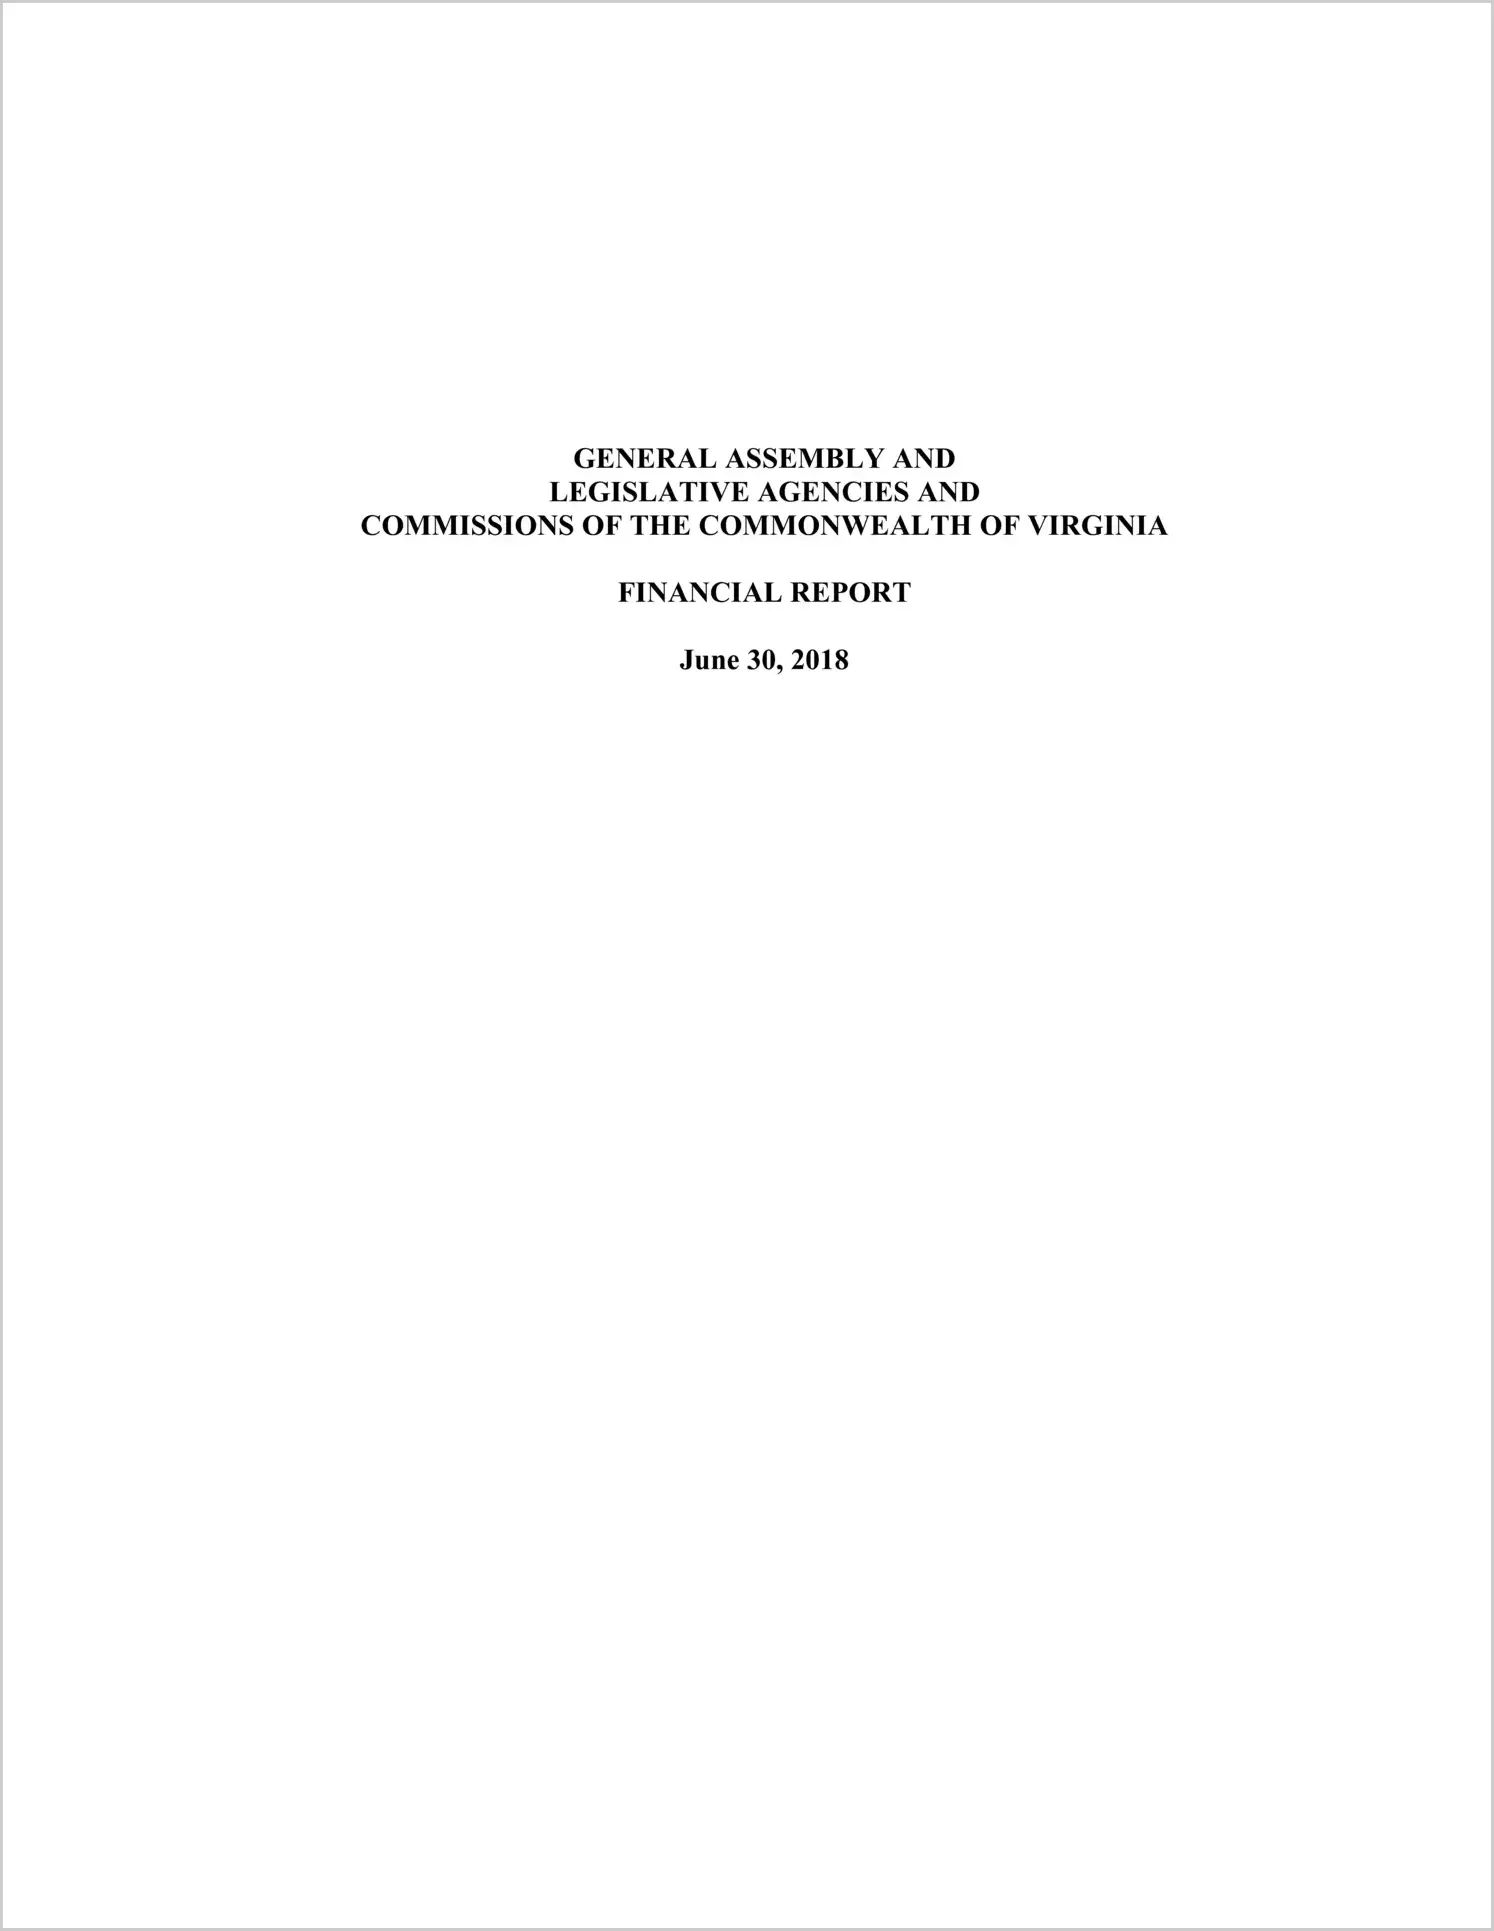 General Assembly and Legislative Agencies and Commissions of the Commonwealth of Virginia Financial Report for the Fiscal Year ended June 30, 2018